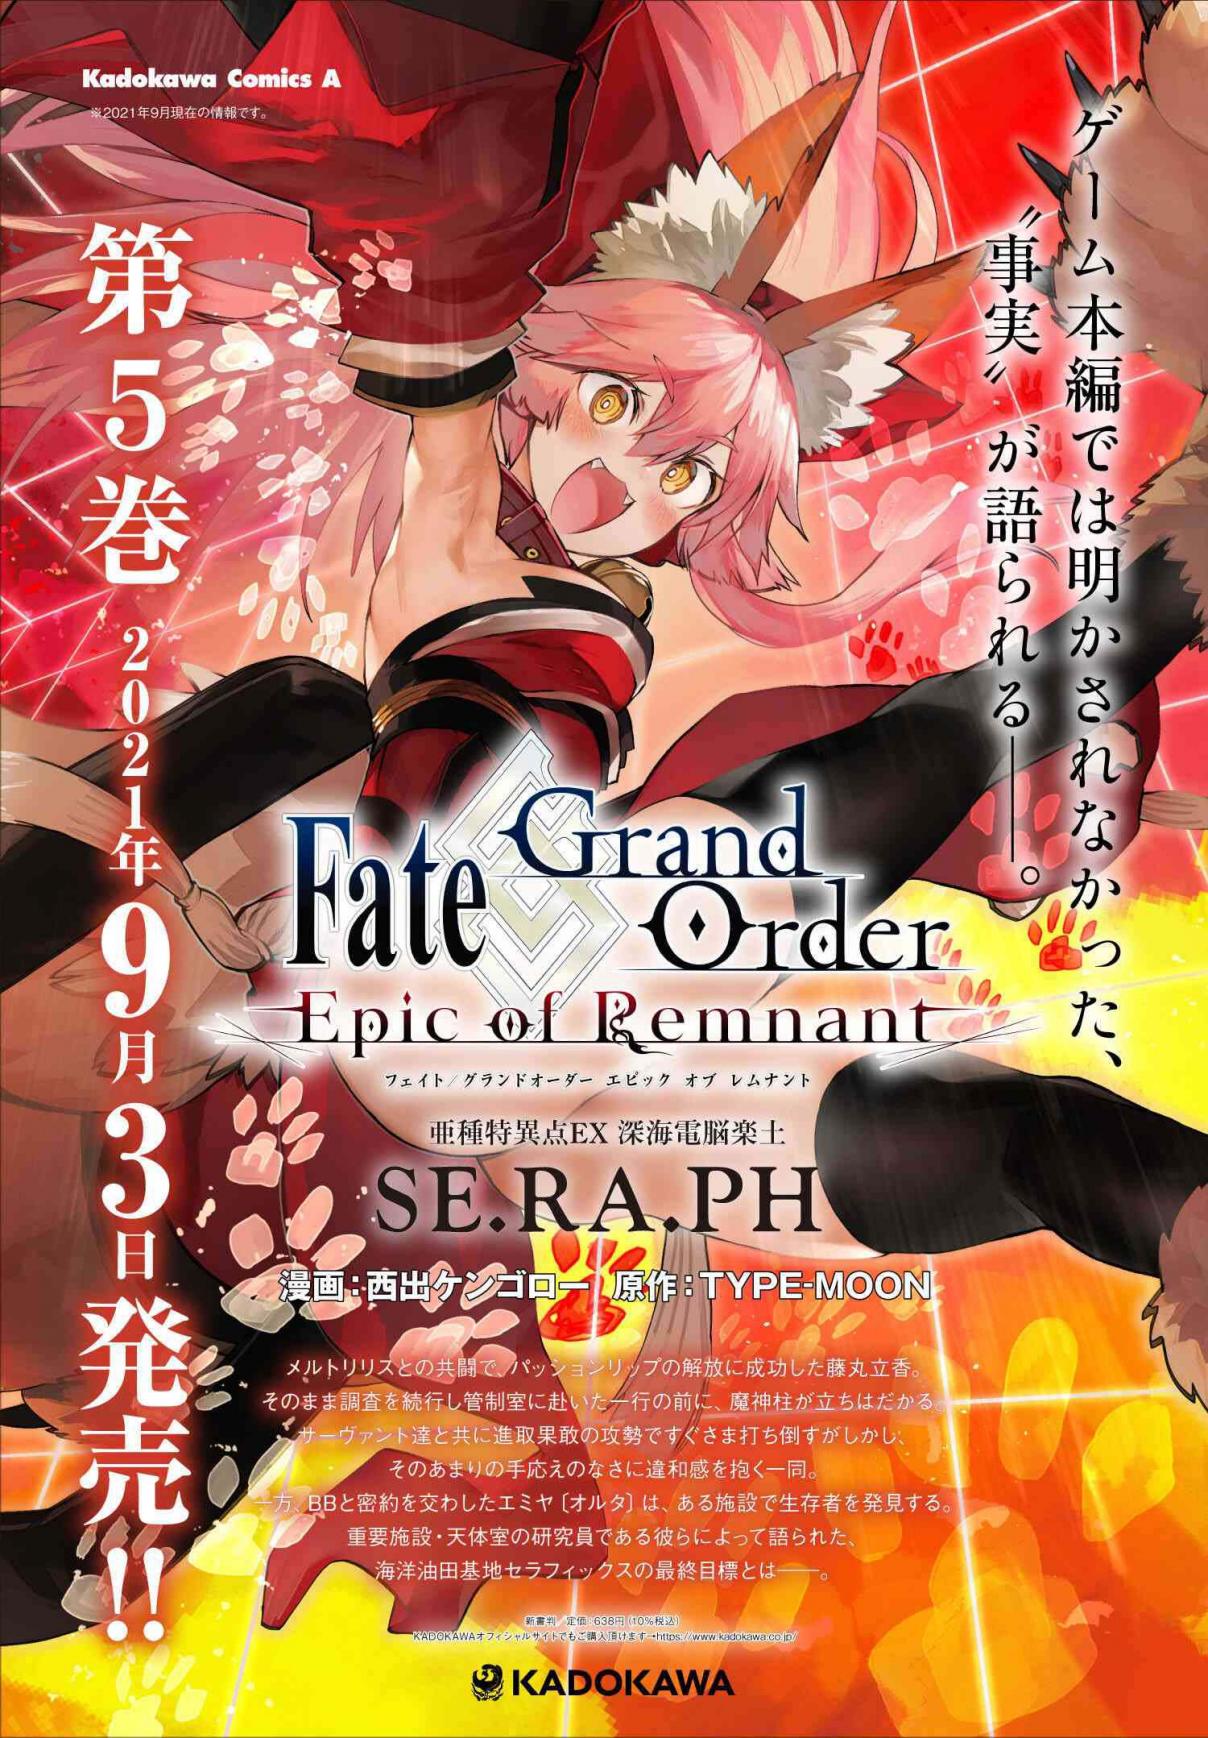 Fate/Grand Order: Epic of Remnant - Deep Sea Cyber-Paradise SE.RA.PH 27.4